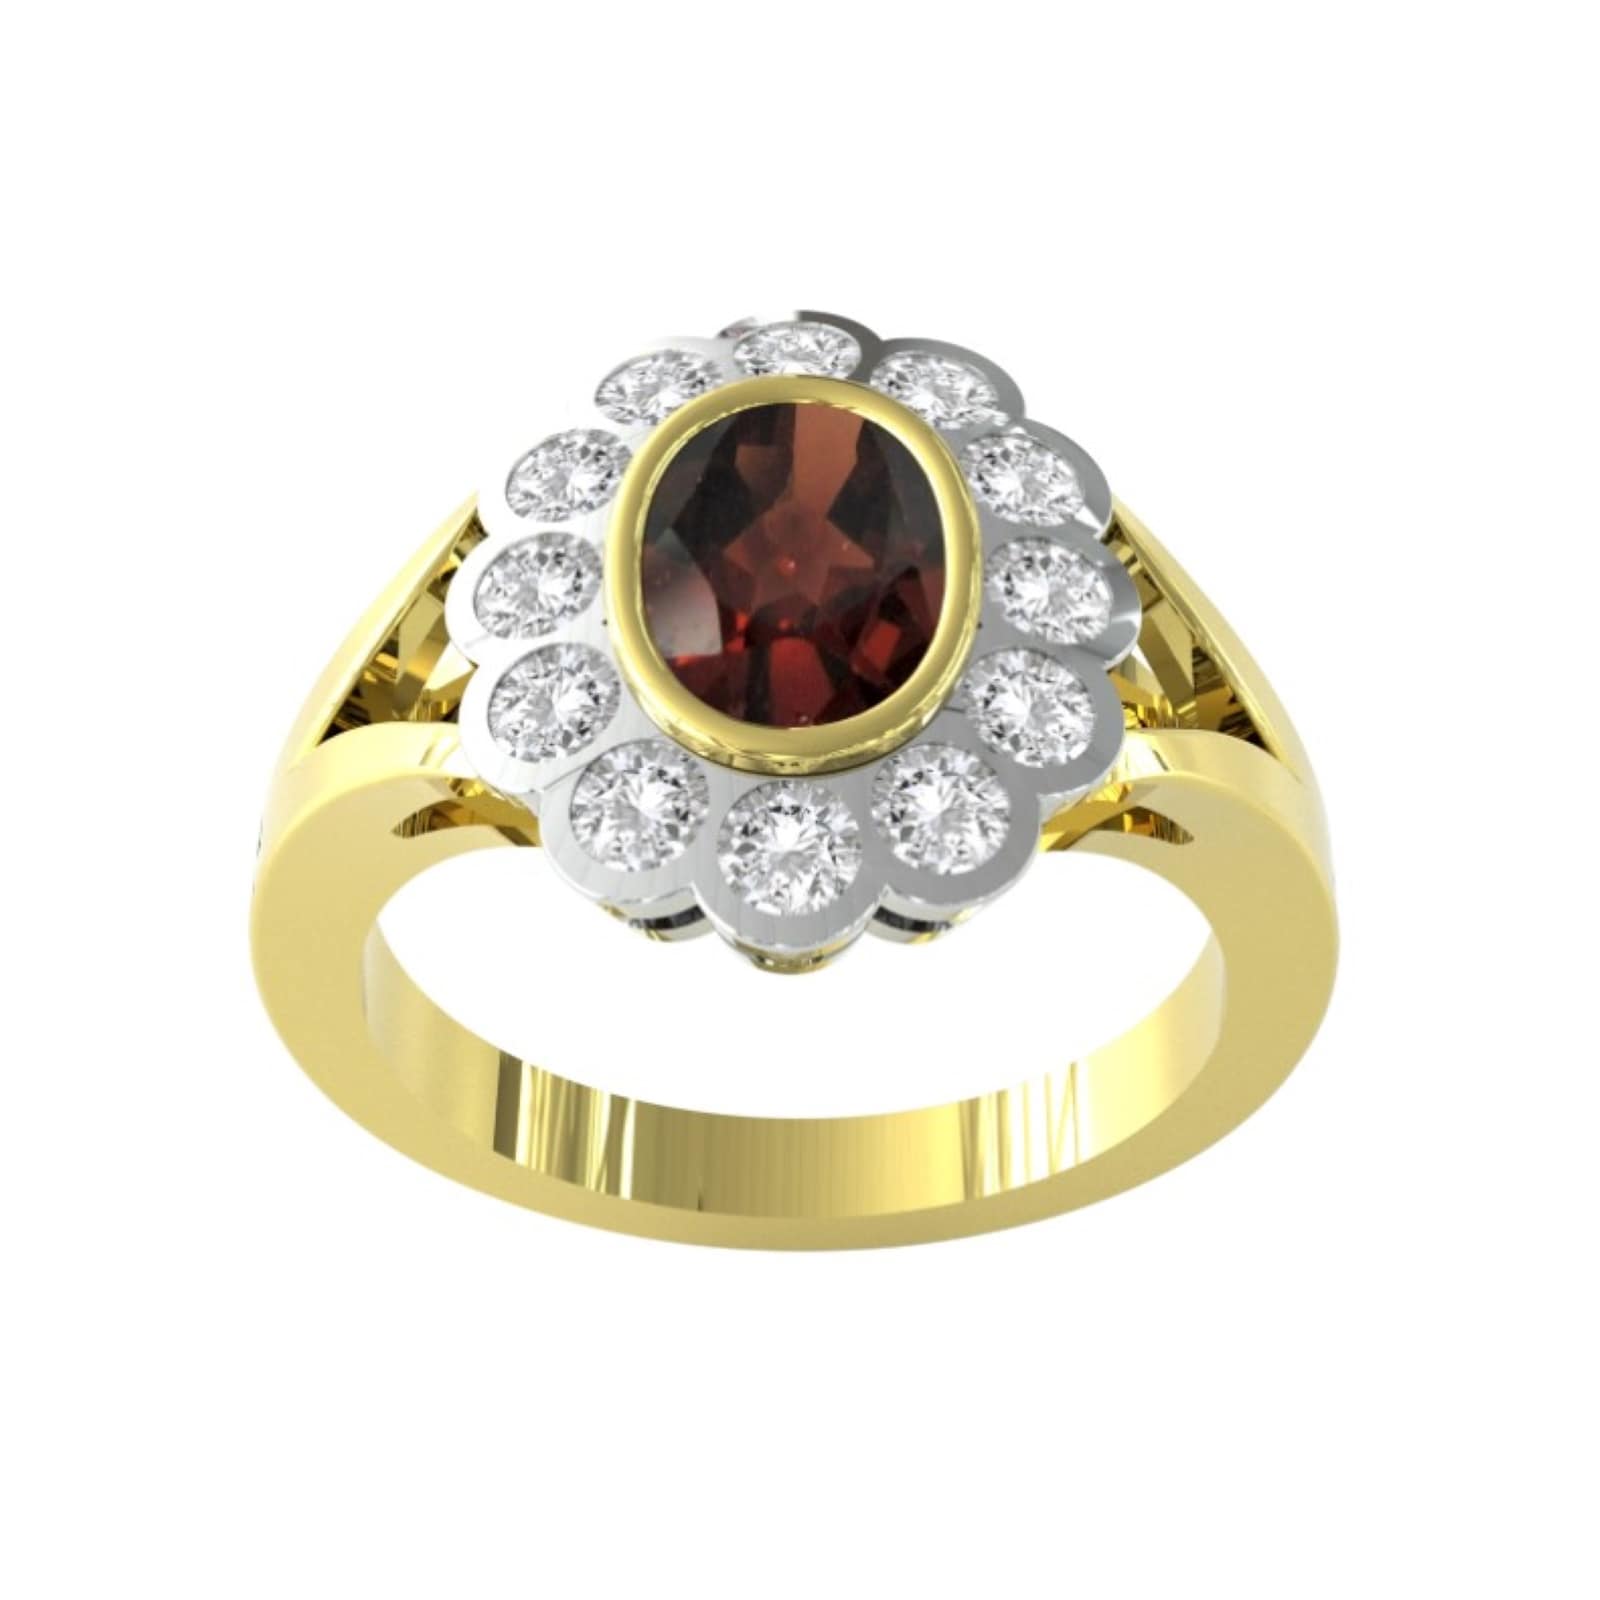 9ct Yellow and White Gold Garnet and Diamond Cluster Ring. - Ring Size C.5